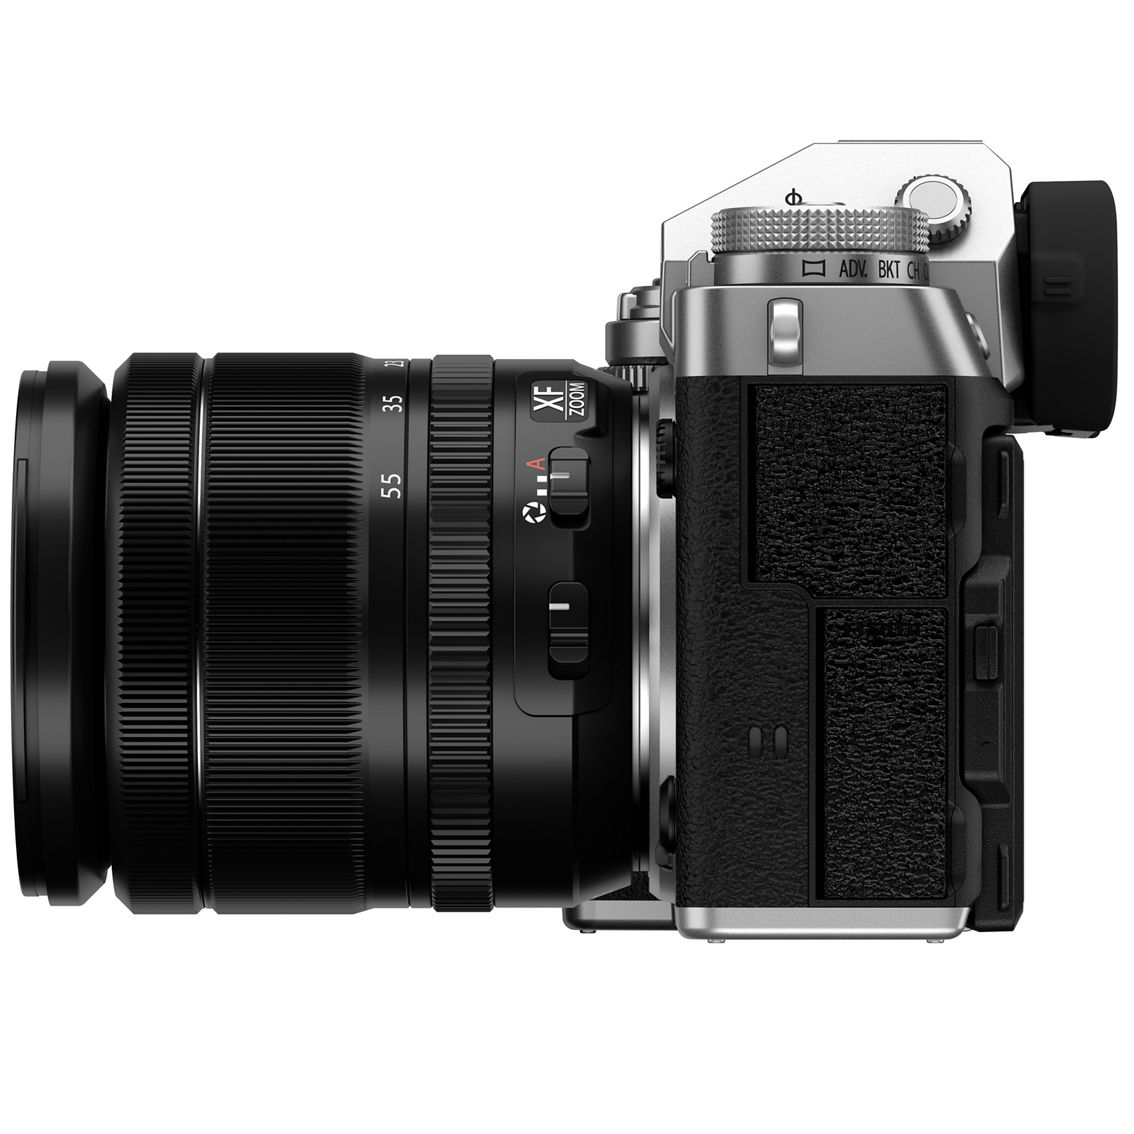 Fujifilm XT5 Mirrorless Camera Body and Silver XF 18 to 55mm F2.8-4 R LM OIS Lens - Image 6 of 7